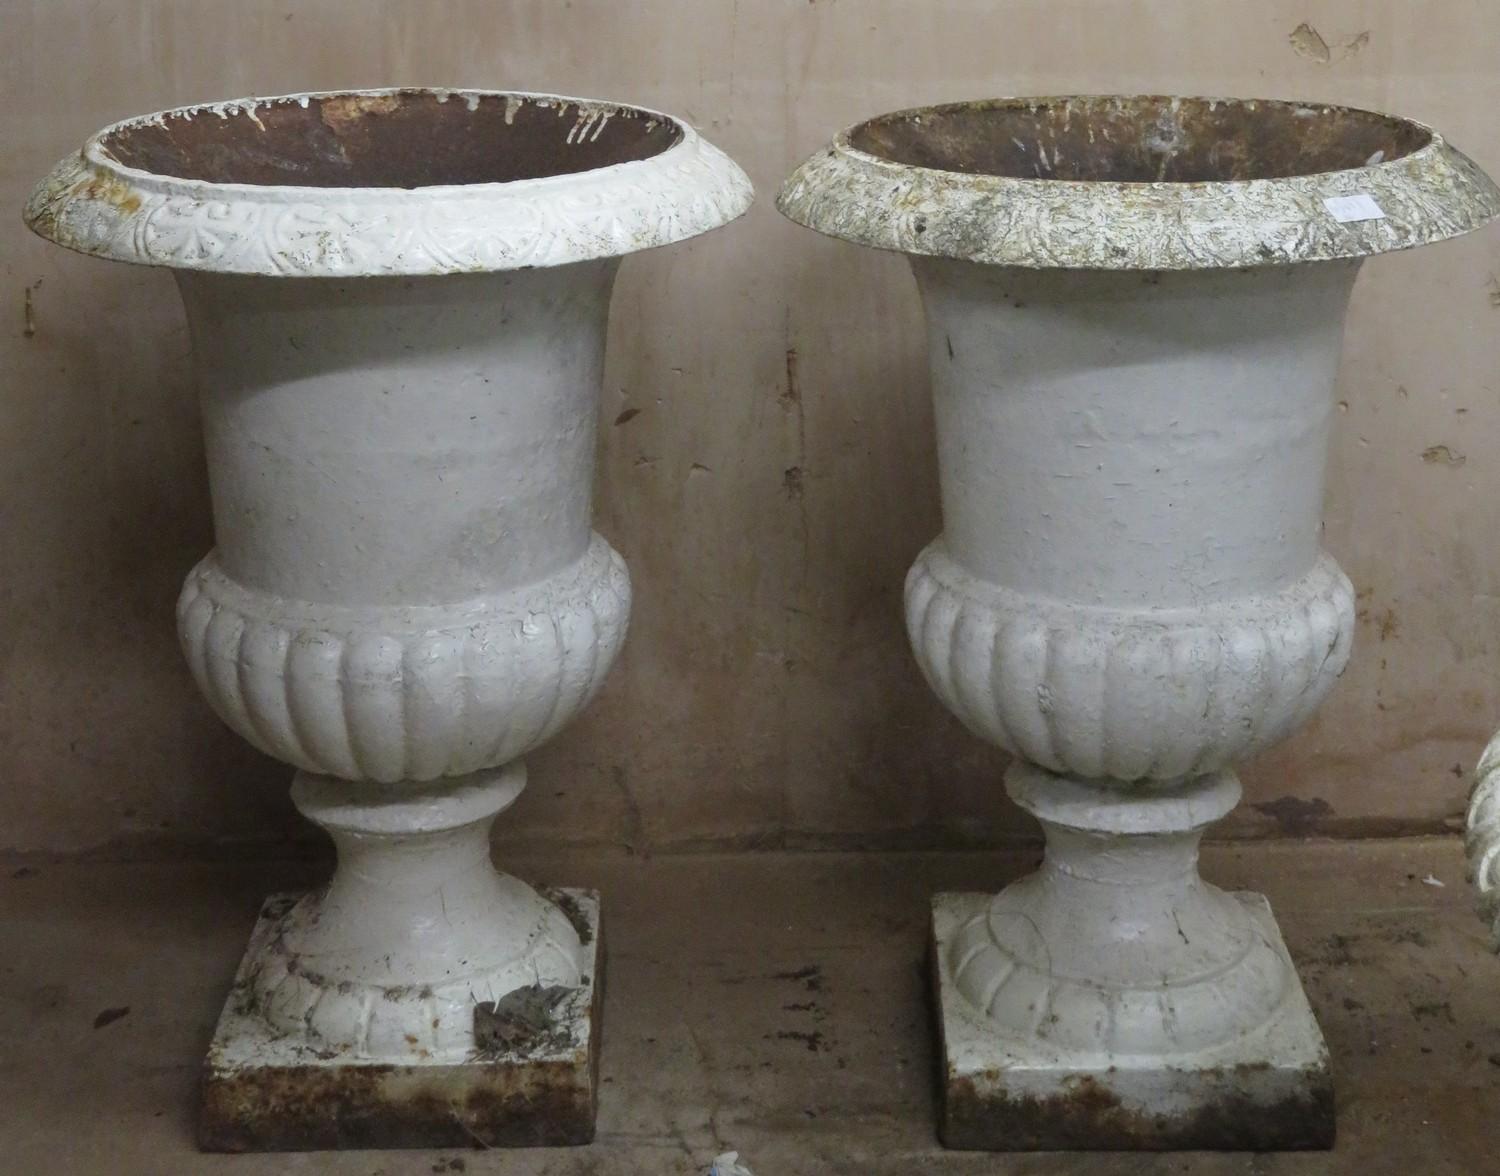 Pair of late 19th/early 20th century wrought iron garden urns. Approx. 71cm H x 51cm Diameter